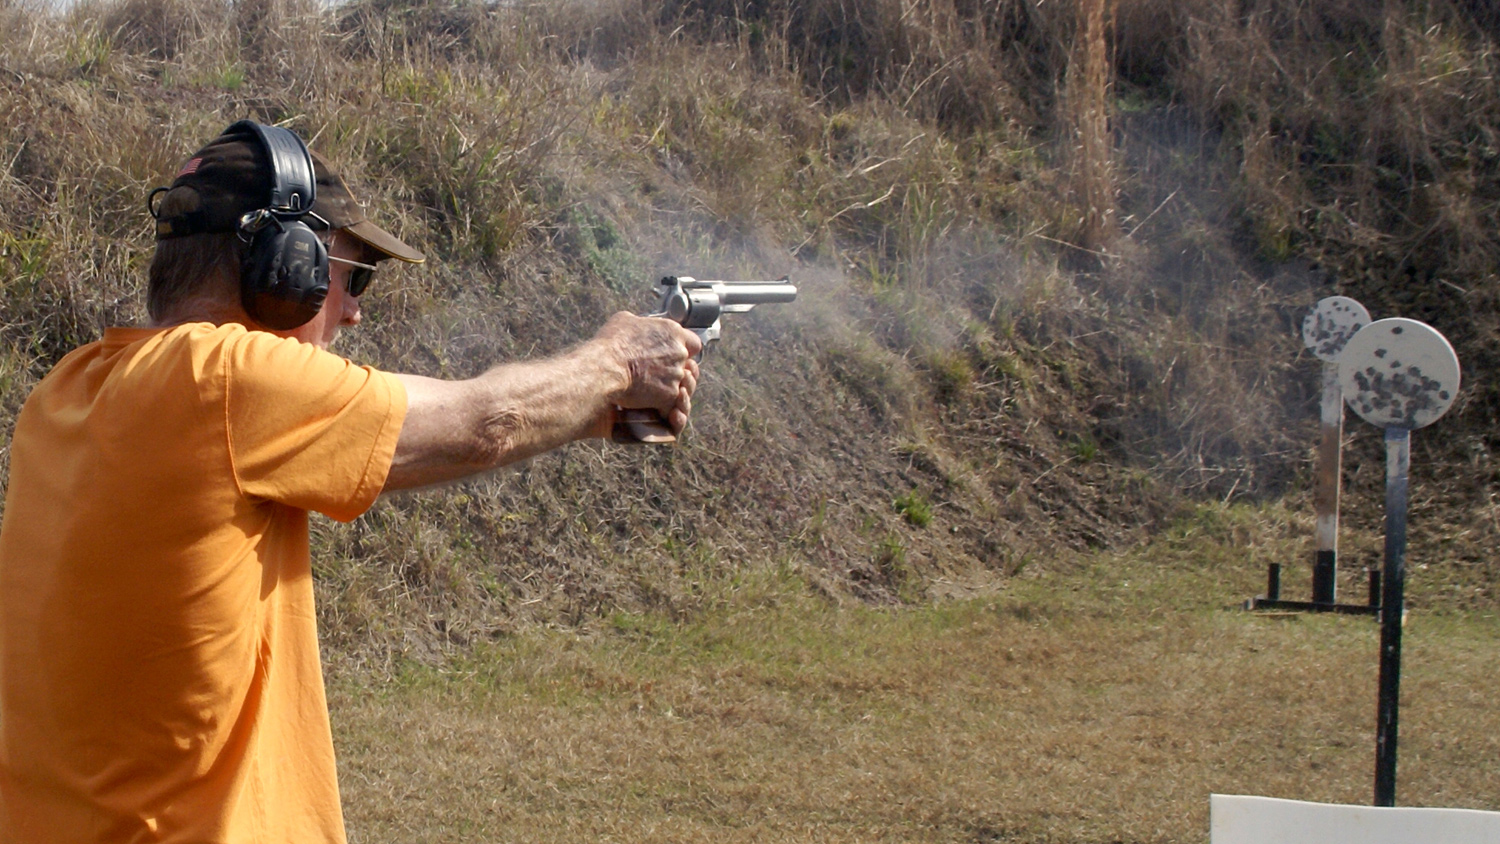 Shooting the Ruger Redhawk